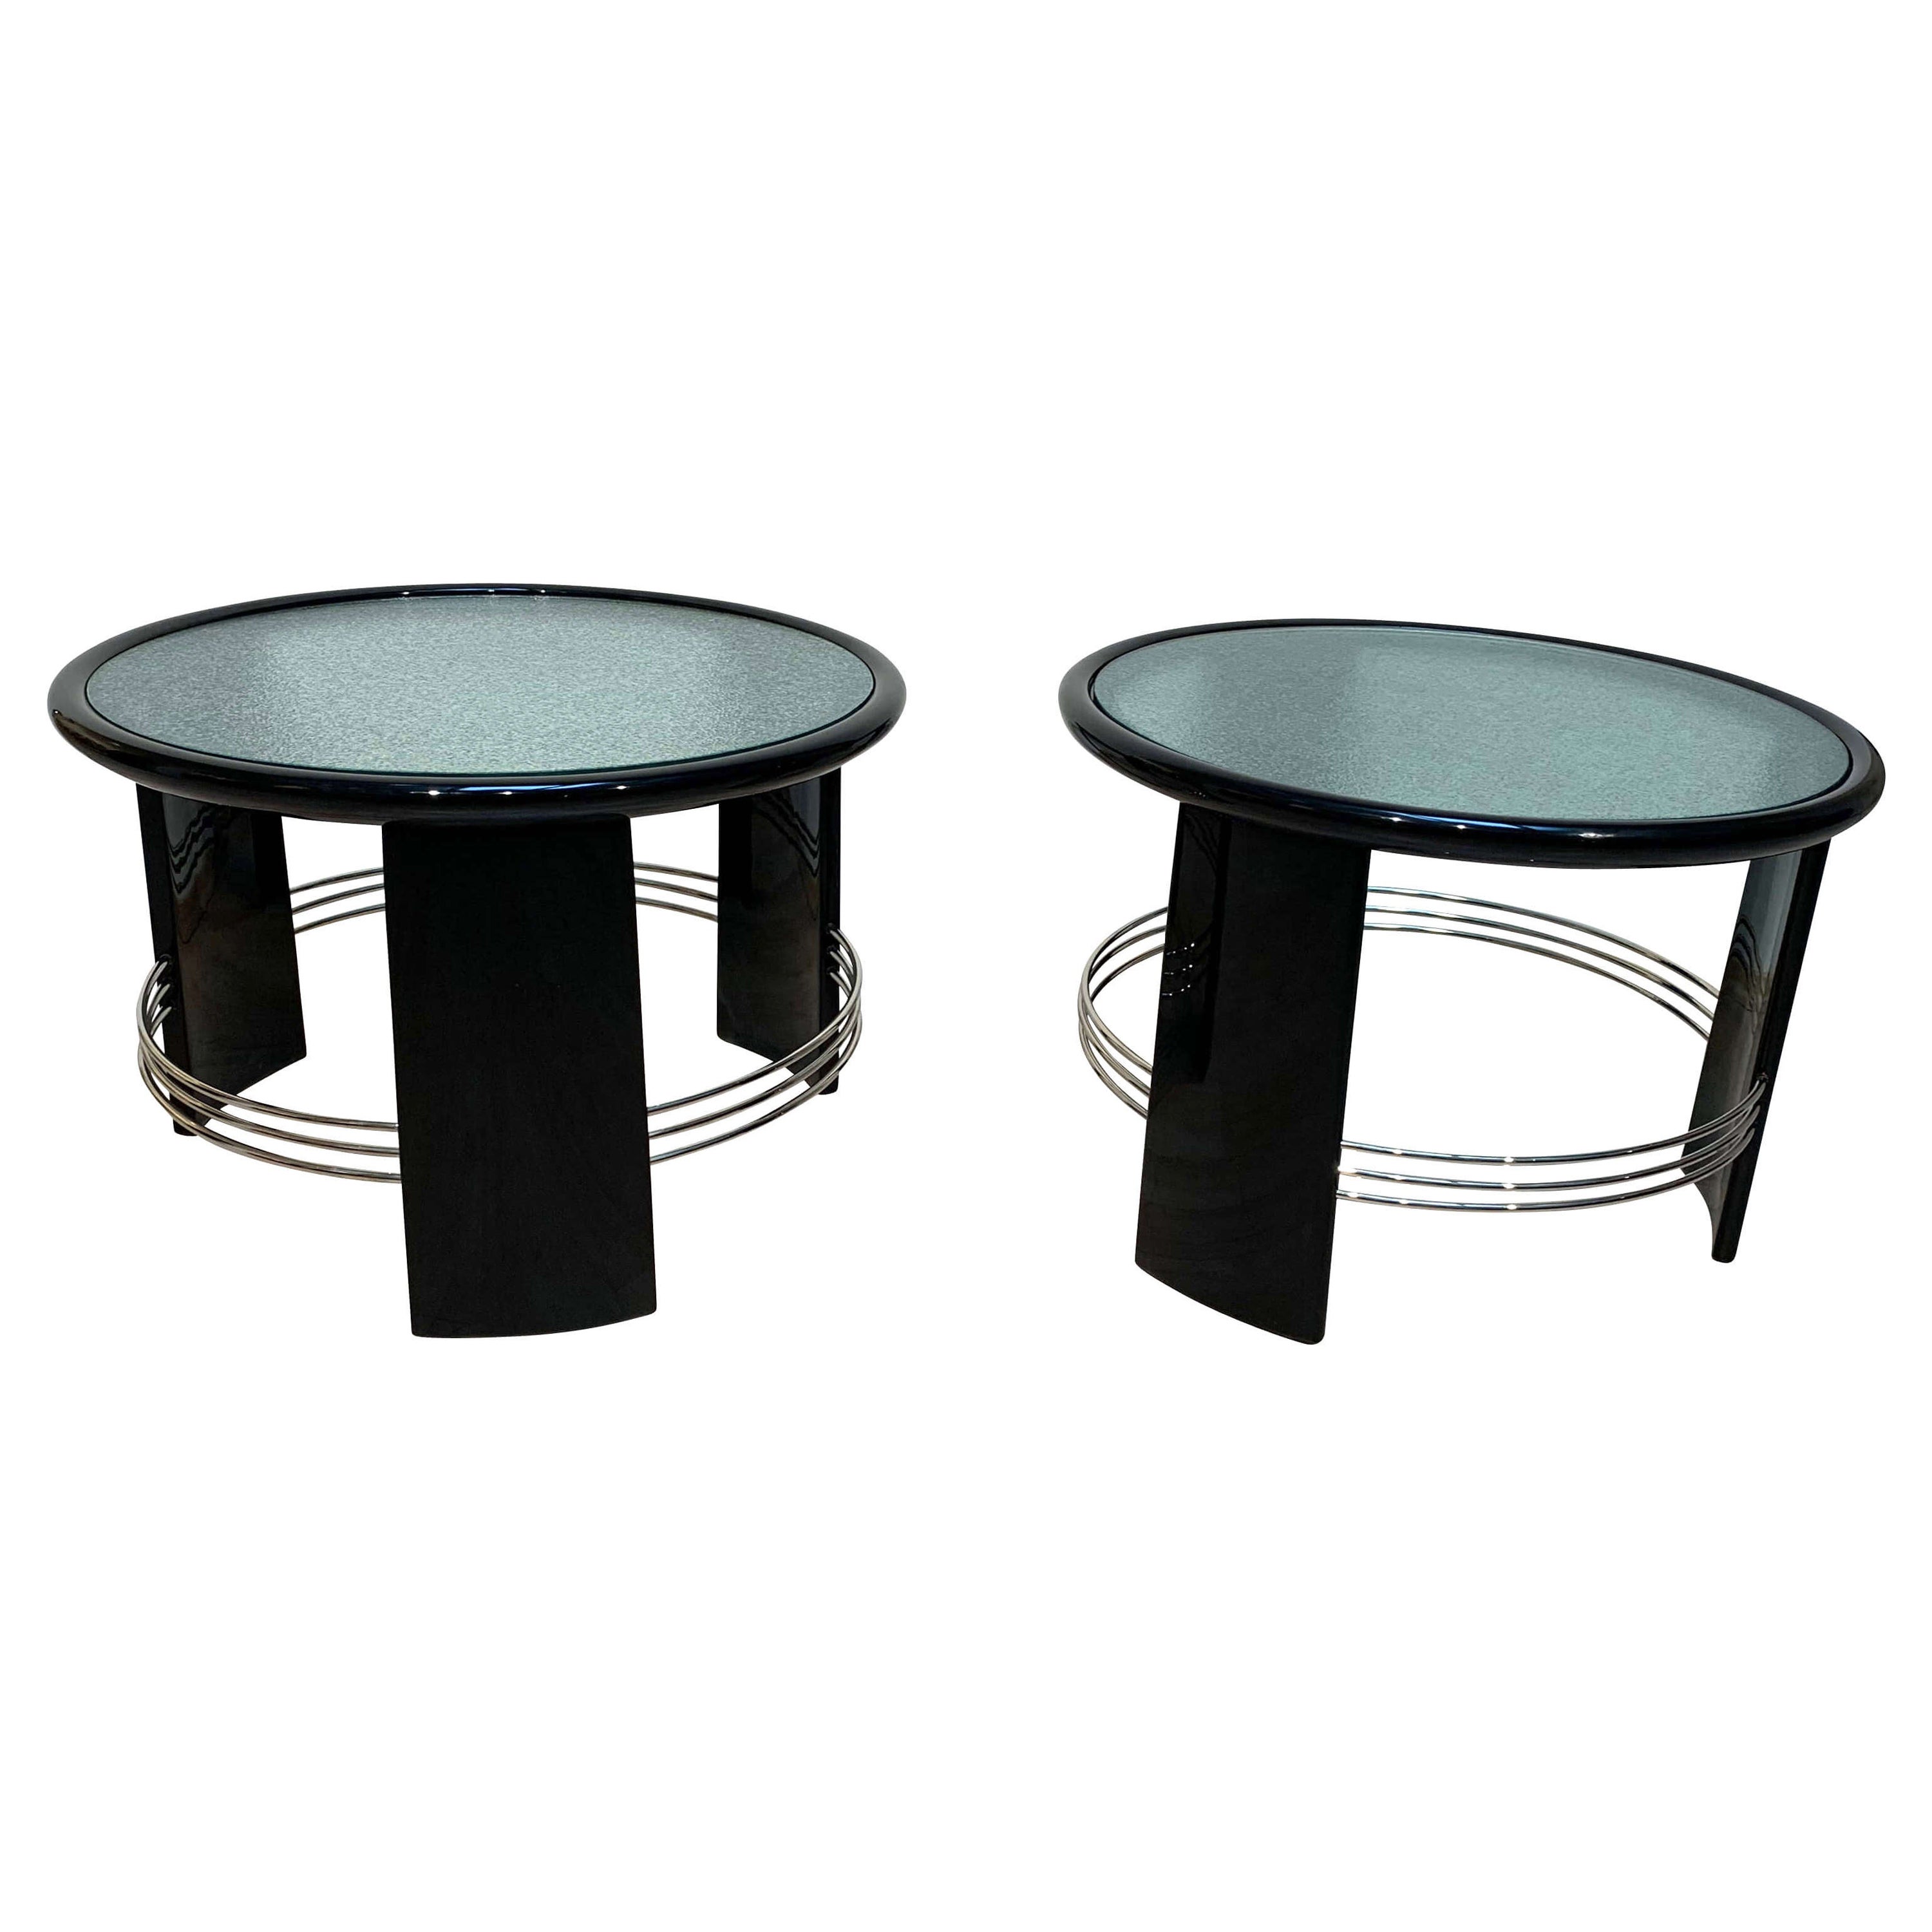 Pair of Art Deco Side or Sofa Tables, Black Lacquer, Nickel, France circa 1930